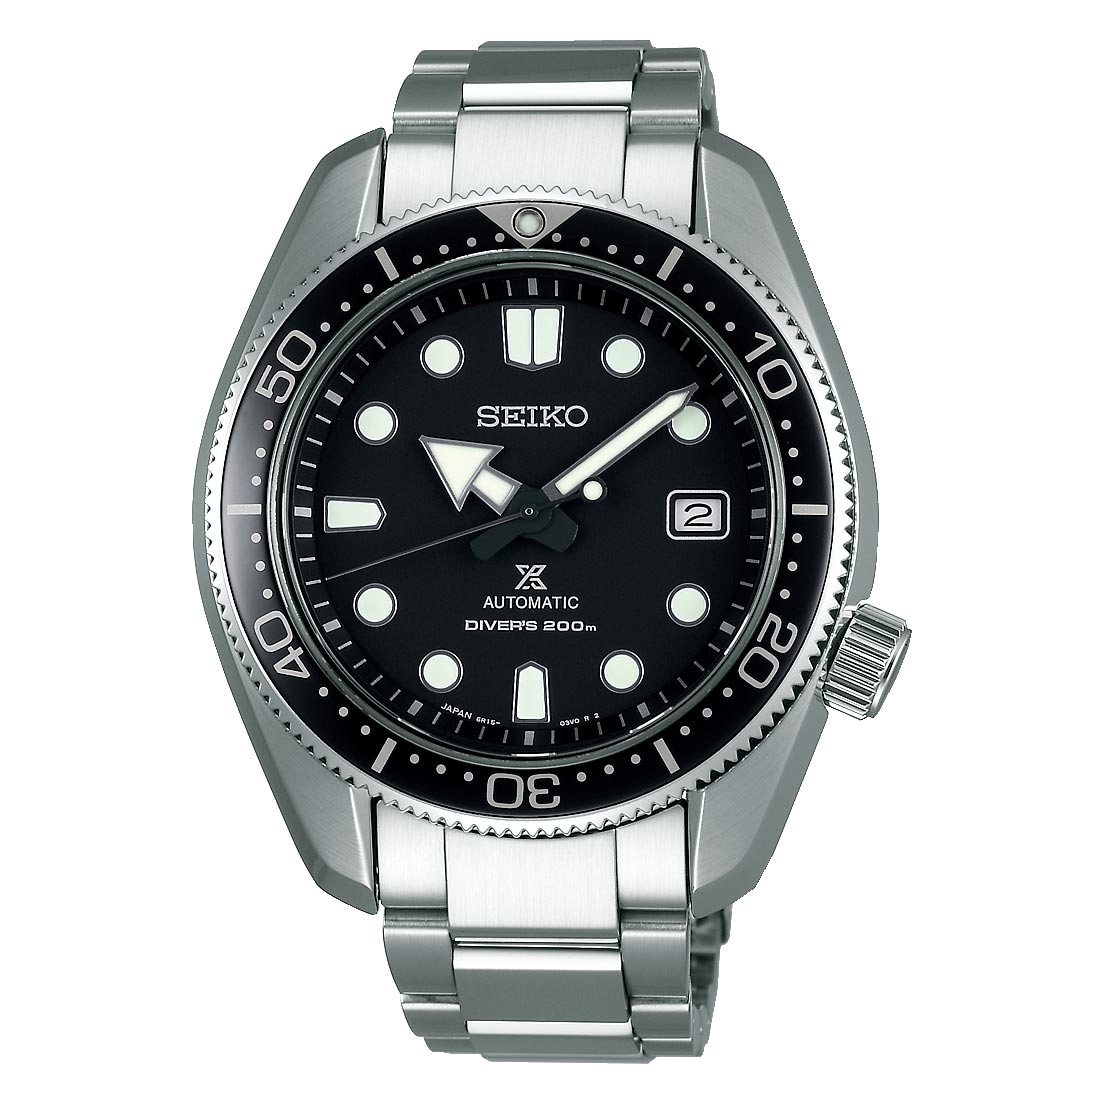 Seiko - Prospex SPB077J1 and SPB079J1 | Time and Watches | The watch blog